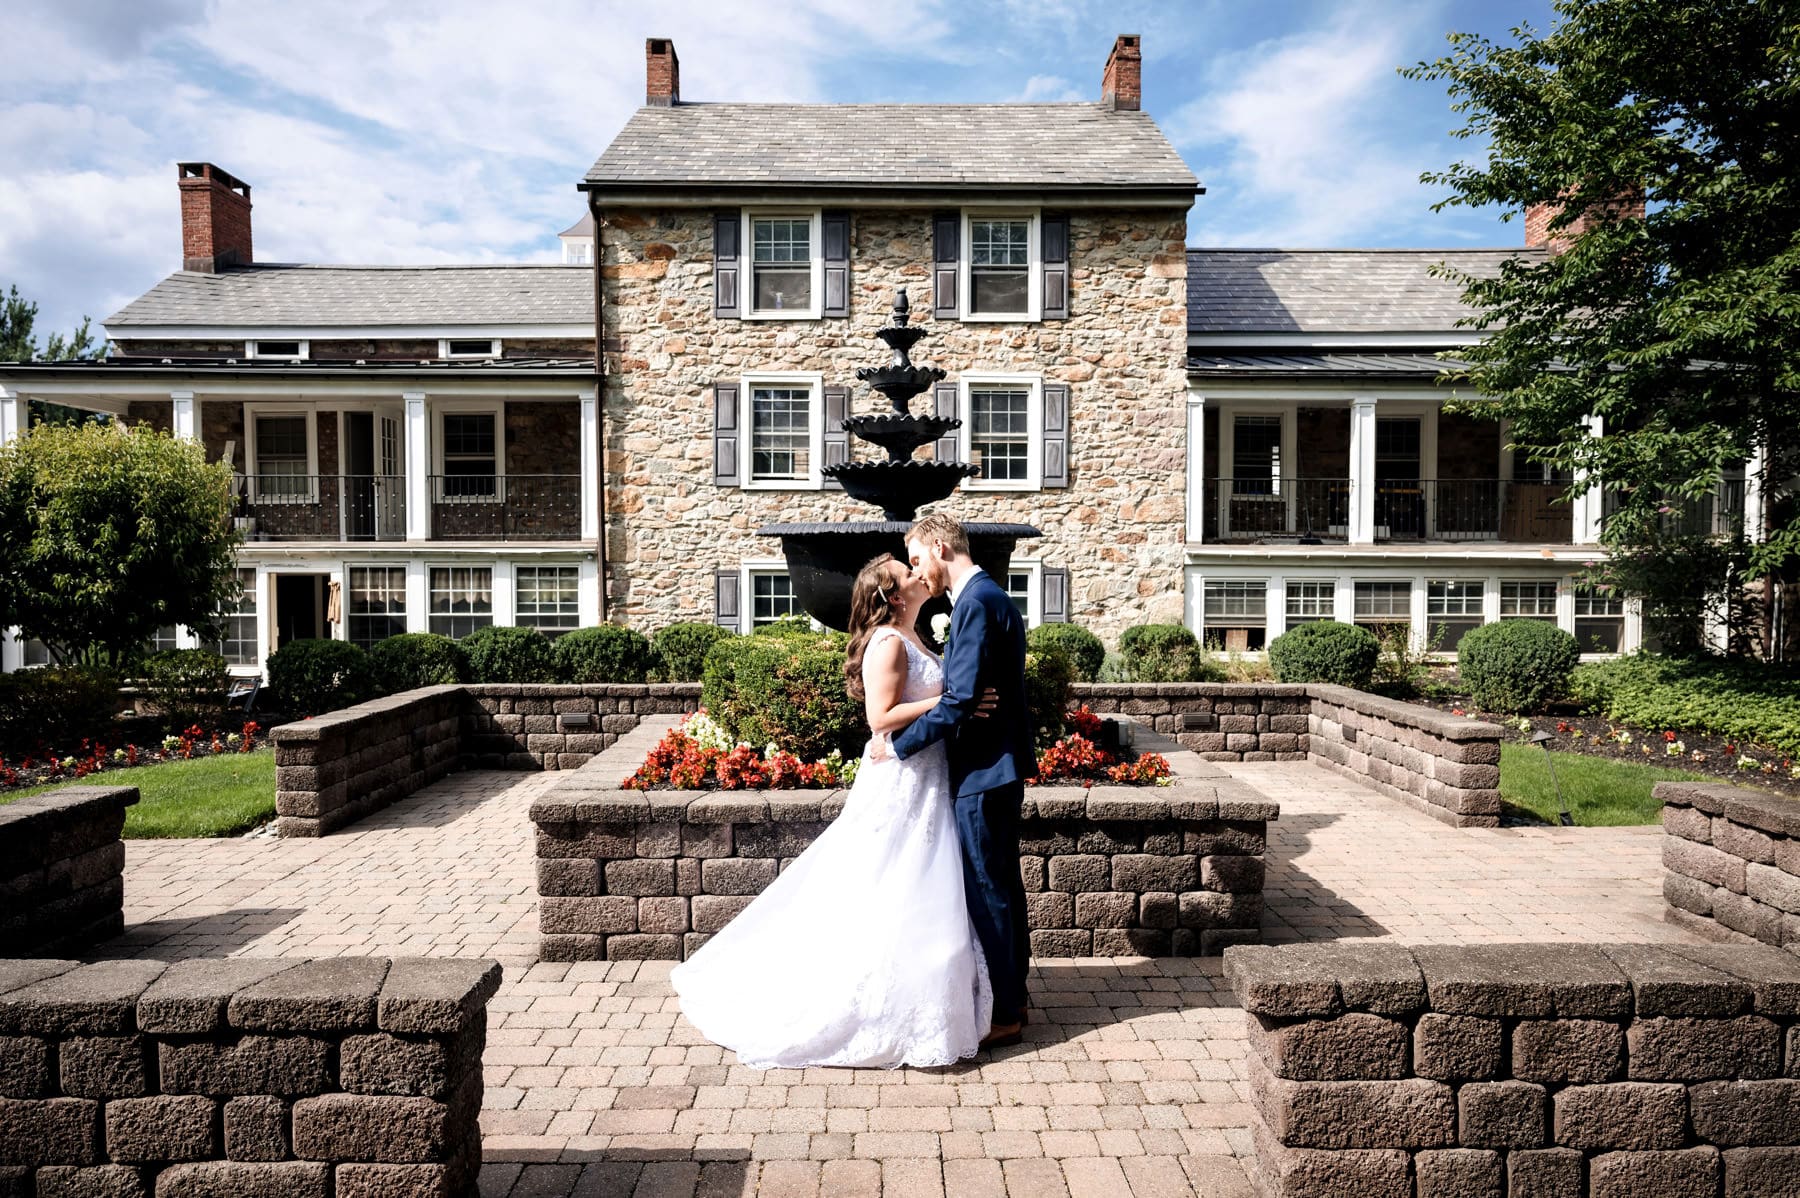 wedding photo in front of the historic Farmhouse wedding venue in NJ